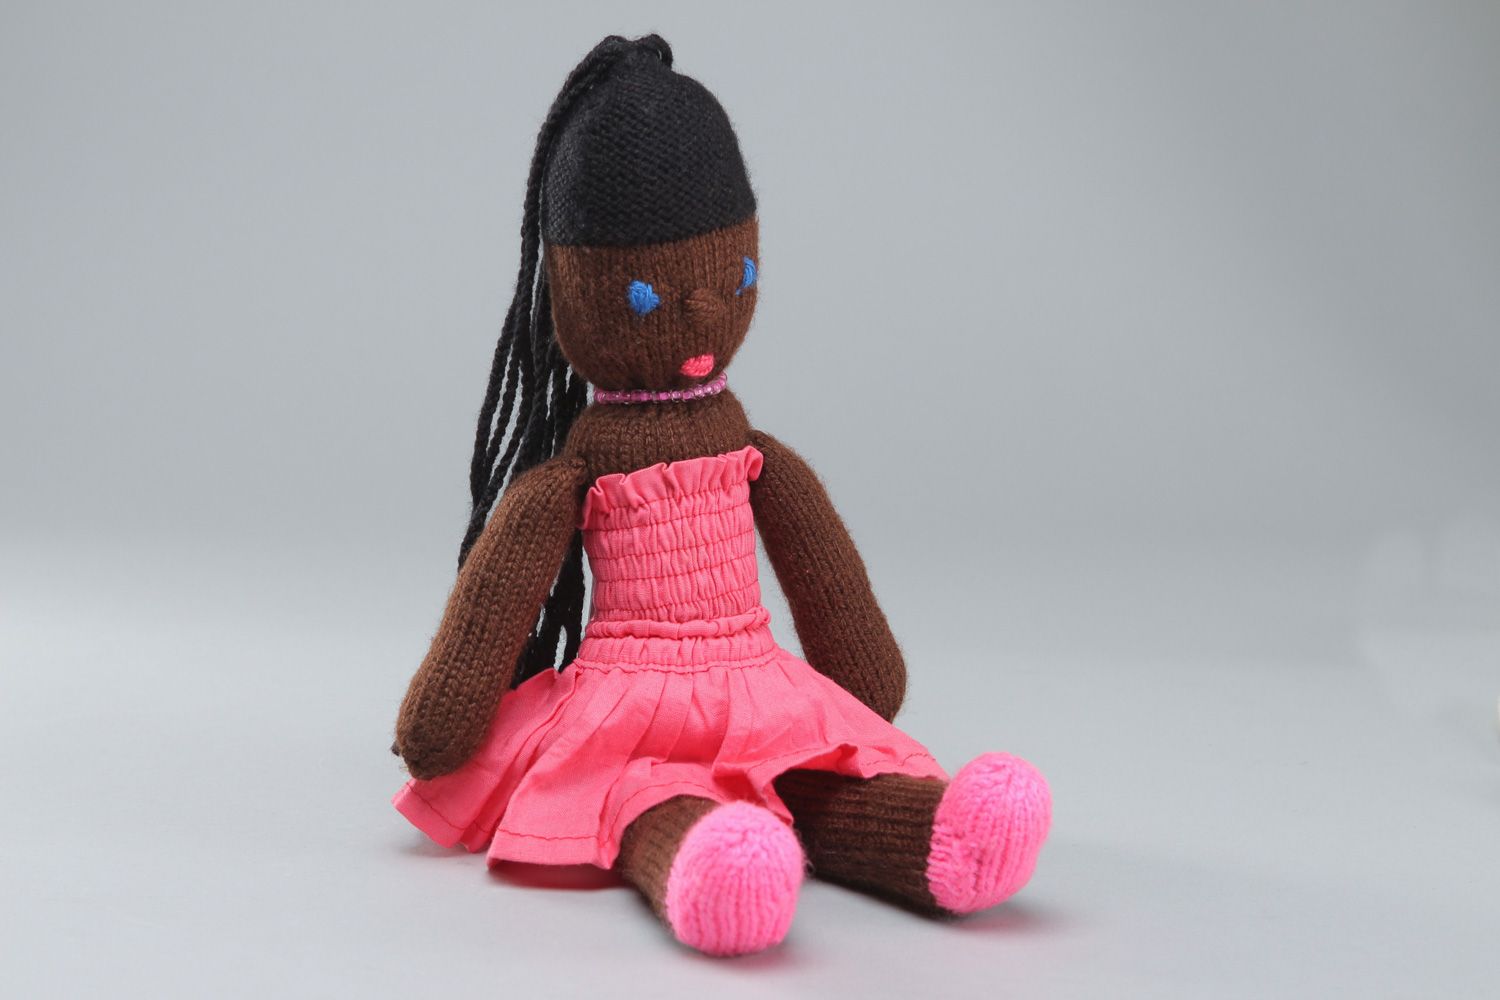 Handmade soft toy knitted of acrylic threads Mulatto in pink dress for little girl photo 1